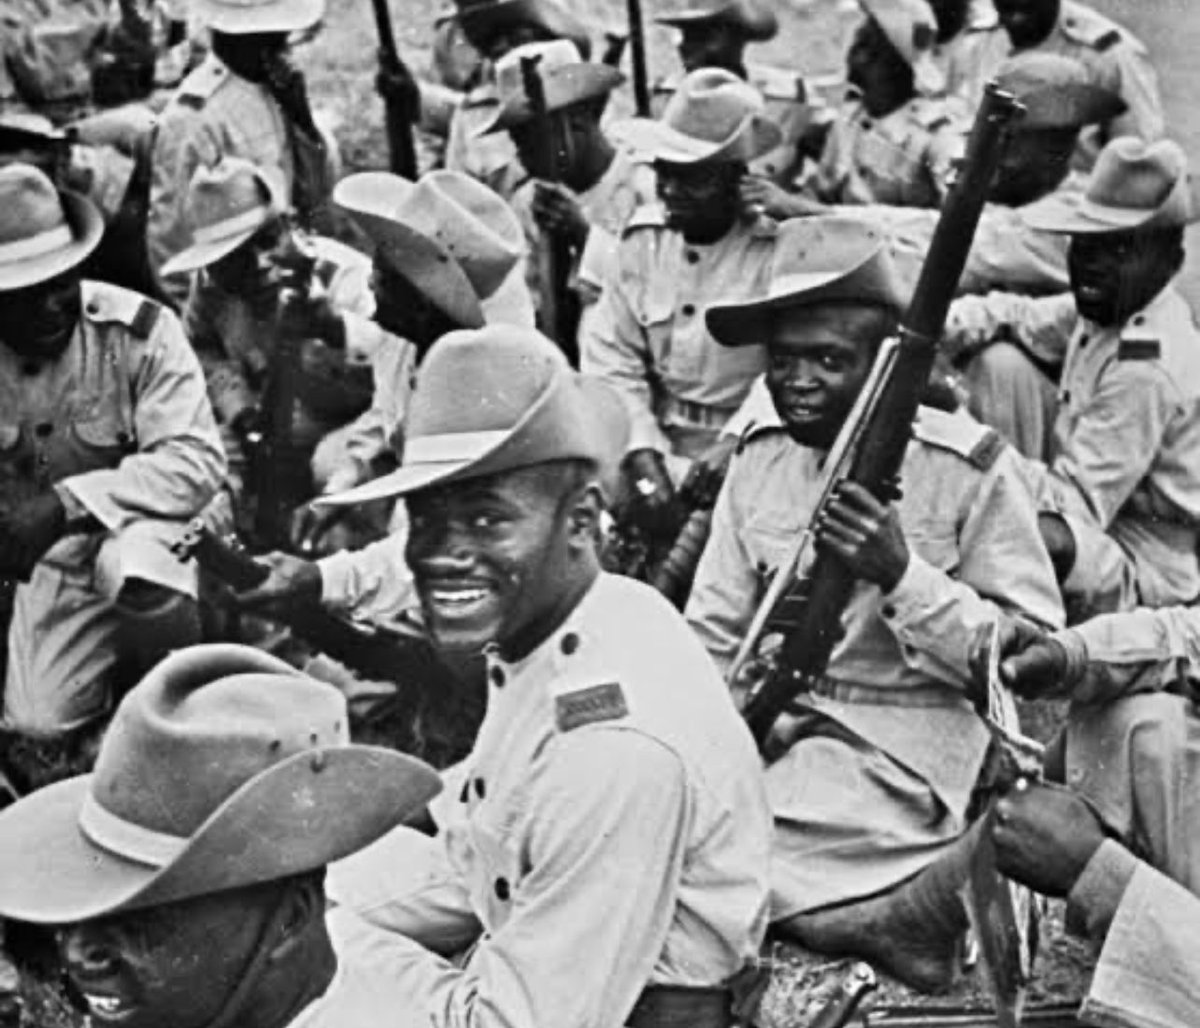 120,000 Nigerians were conscripted to fight in World War 2 and the colonists did not honor them… These are our heroes! May they Rest In Peace 🪦